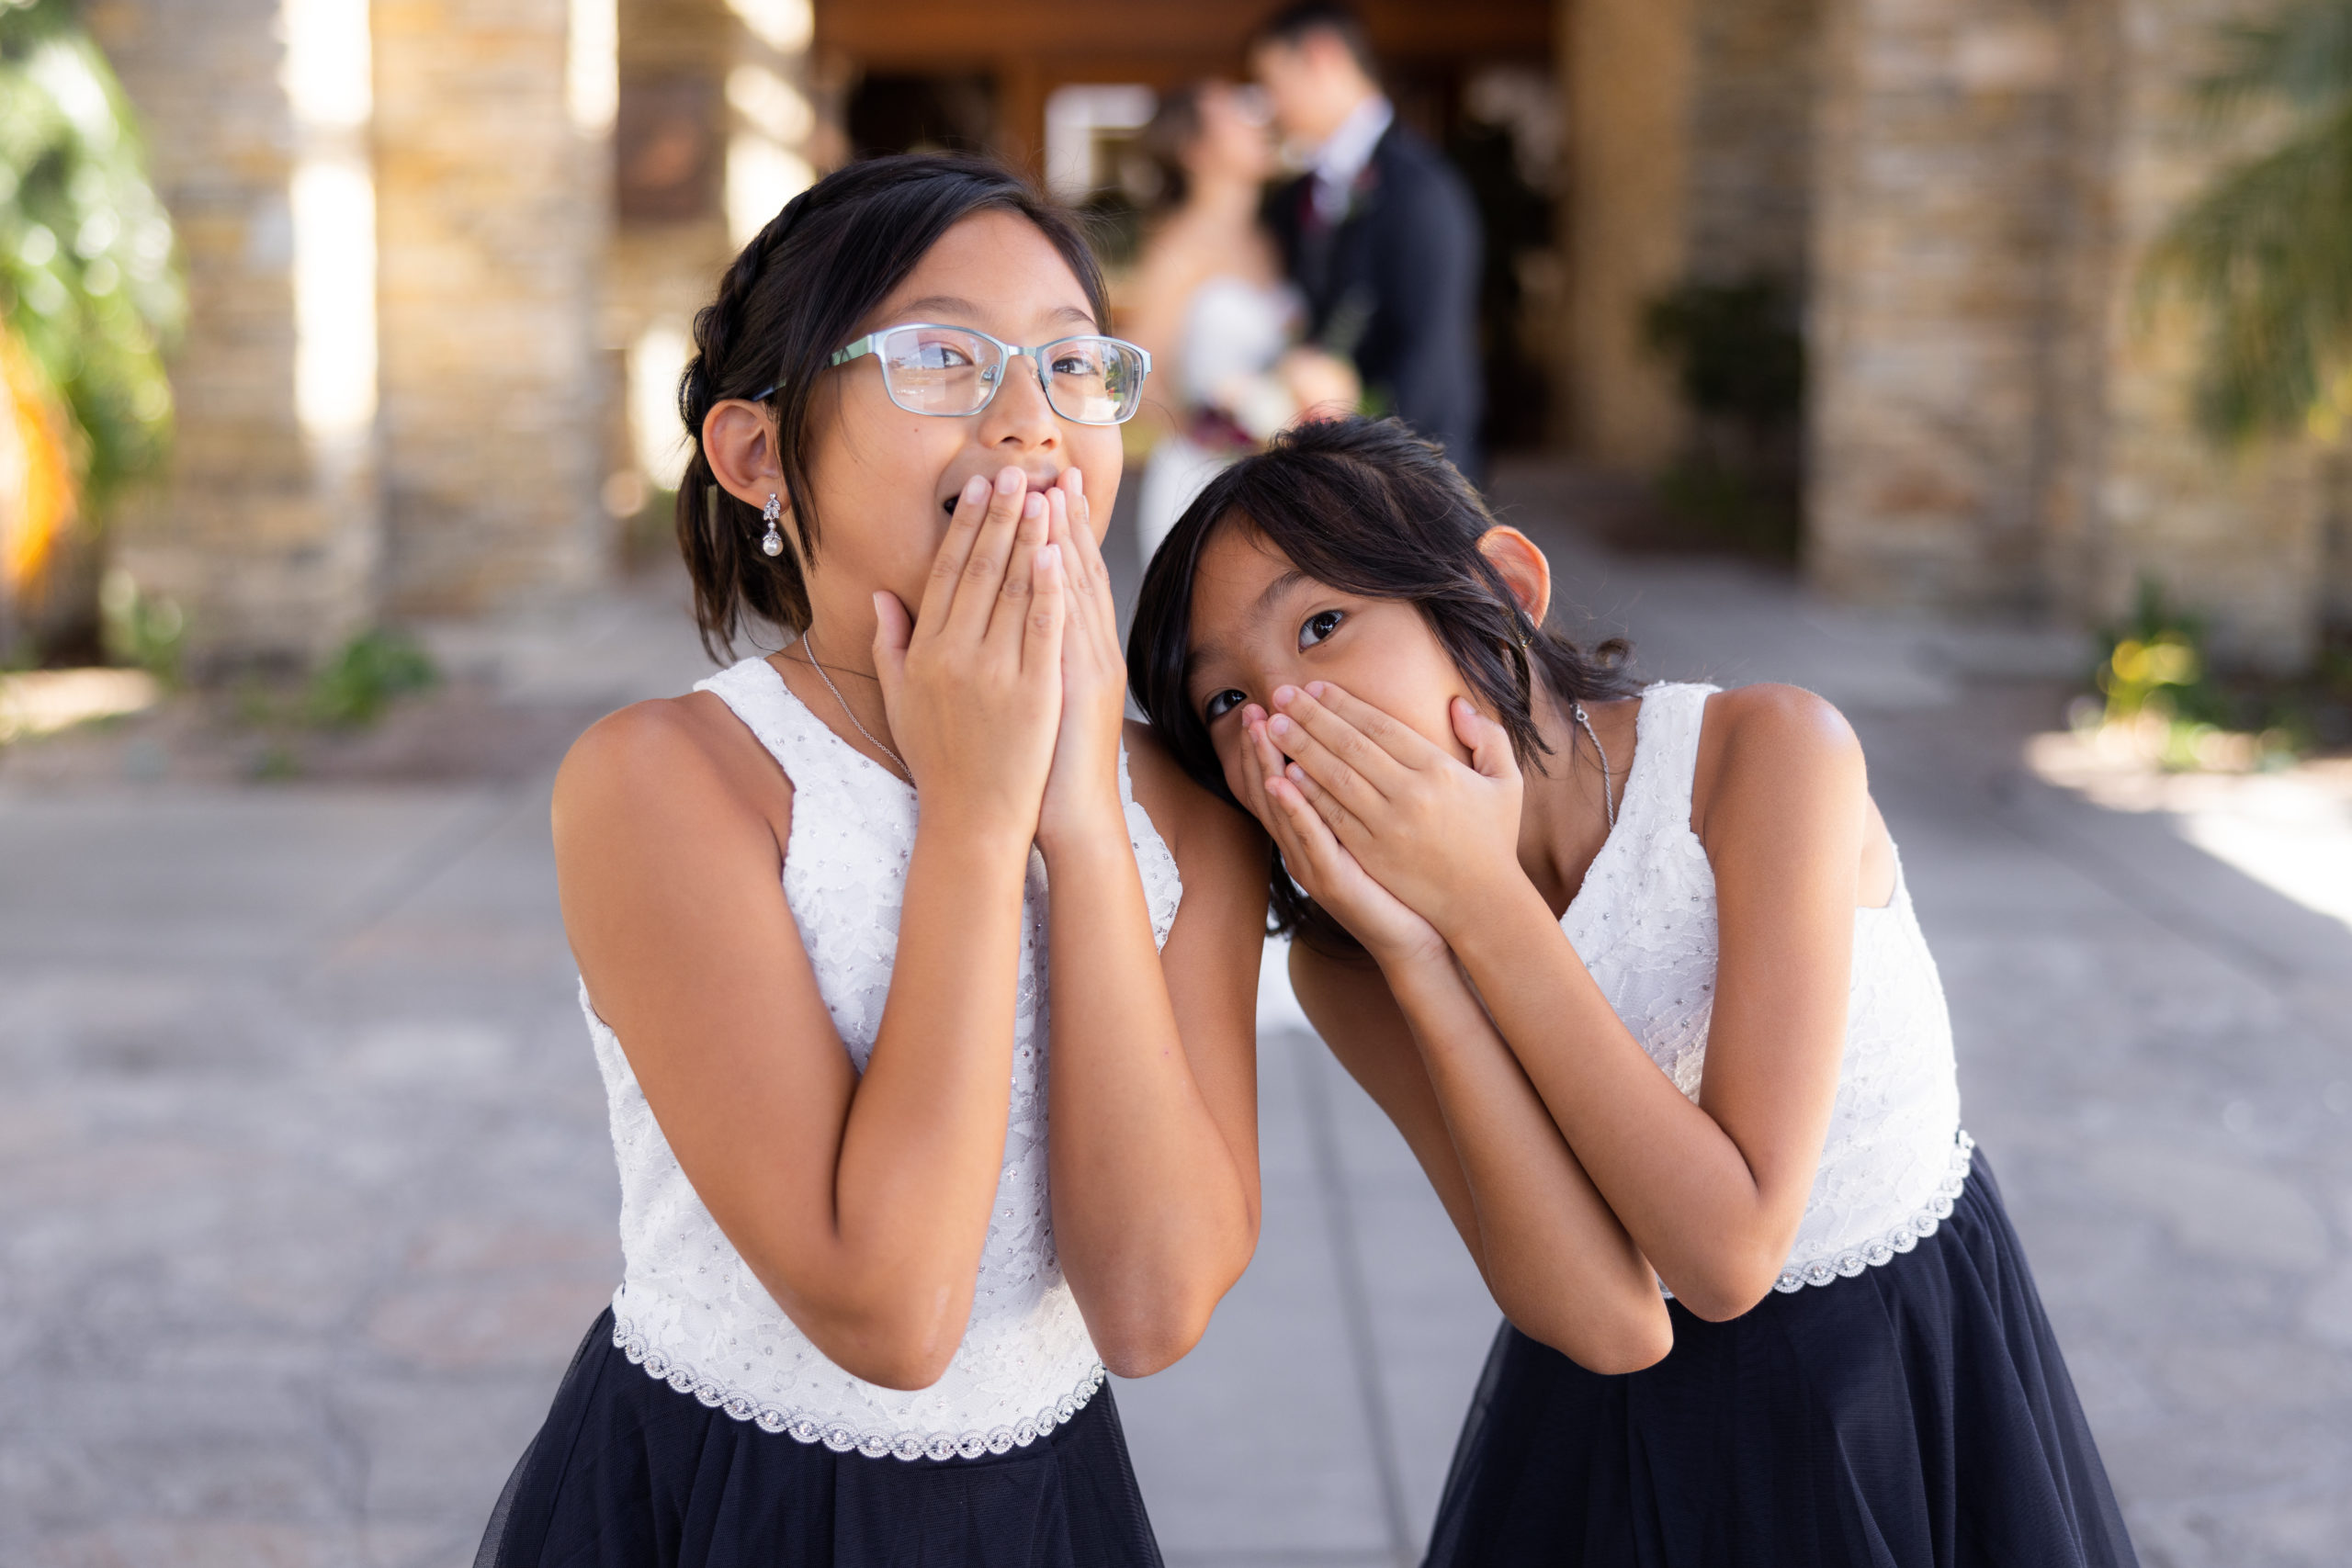 flower girls in white and navy dresses cover their mouths in surprise as bride and groom kiss in the background